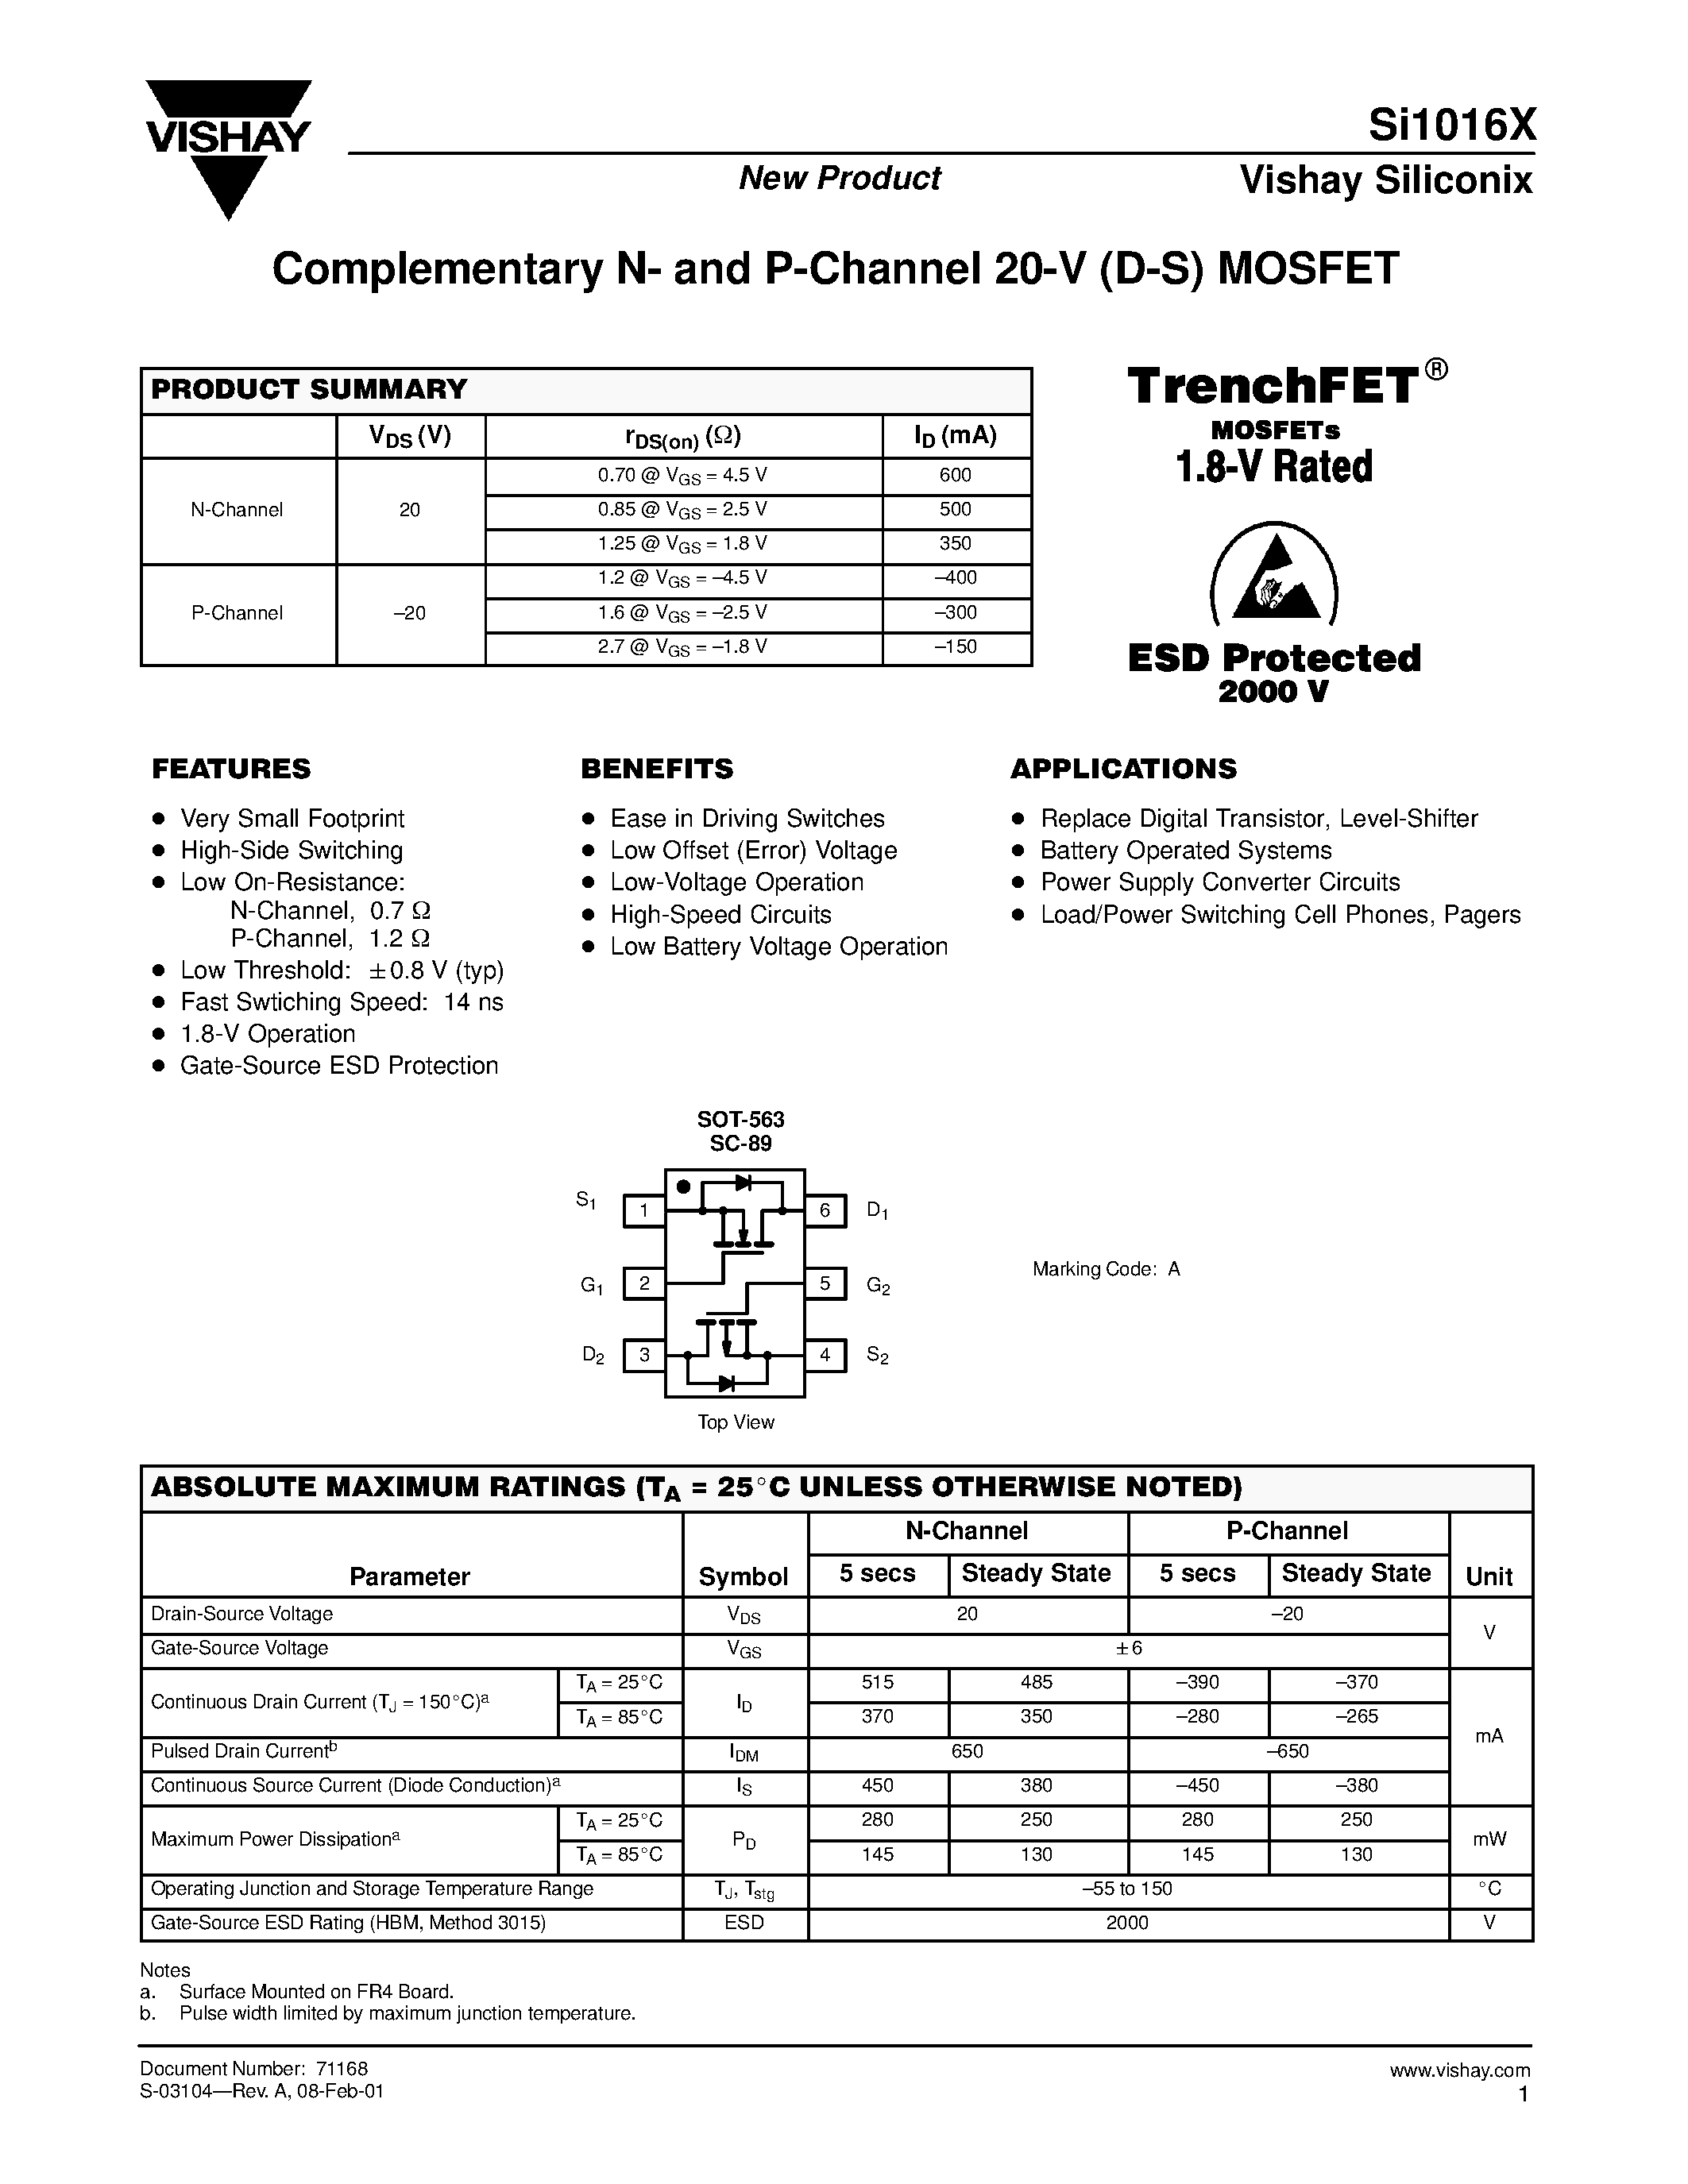 Datasheet SI1016X - Complementary N and P-Channel 20-V (D-S) MOSFET page 1